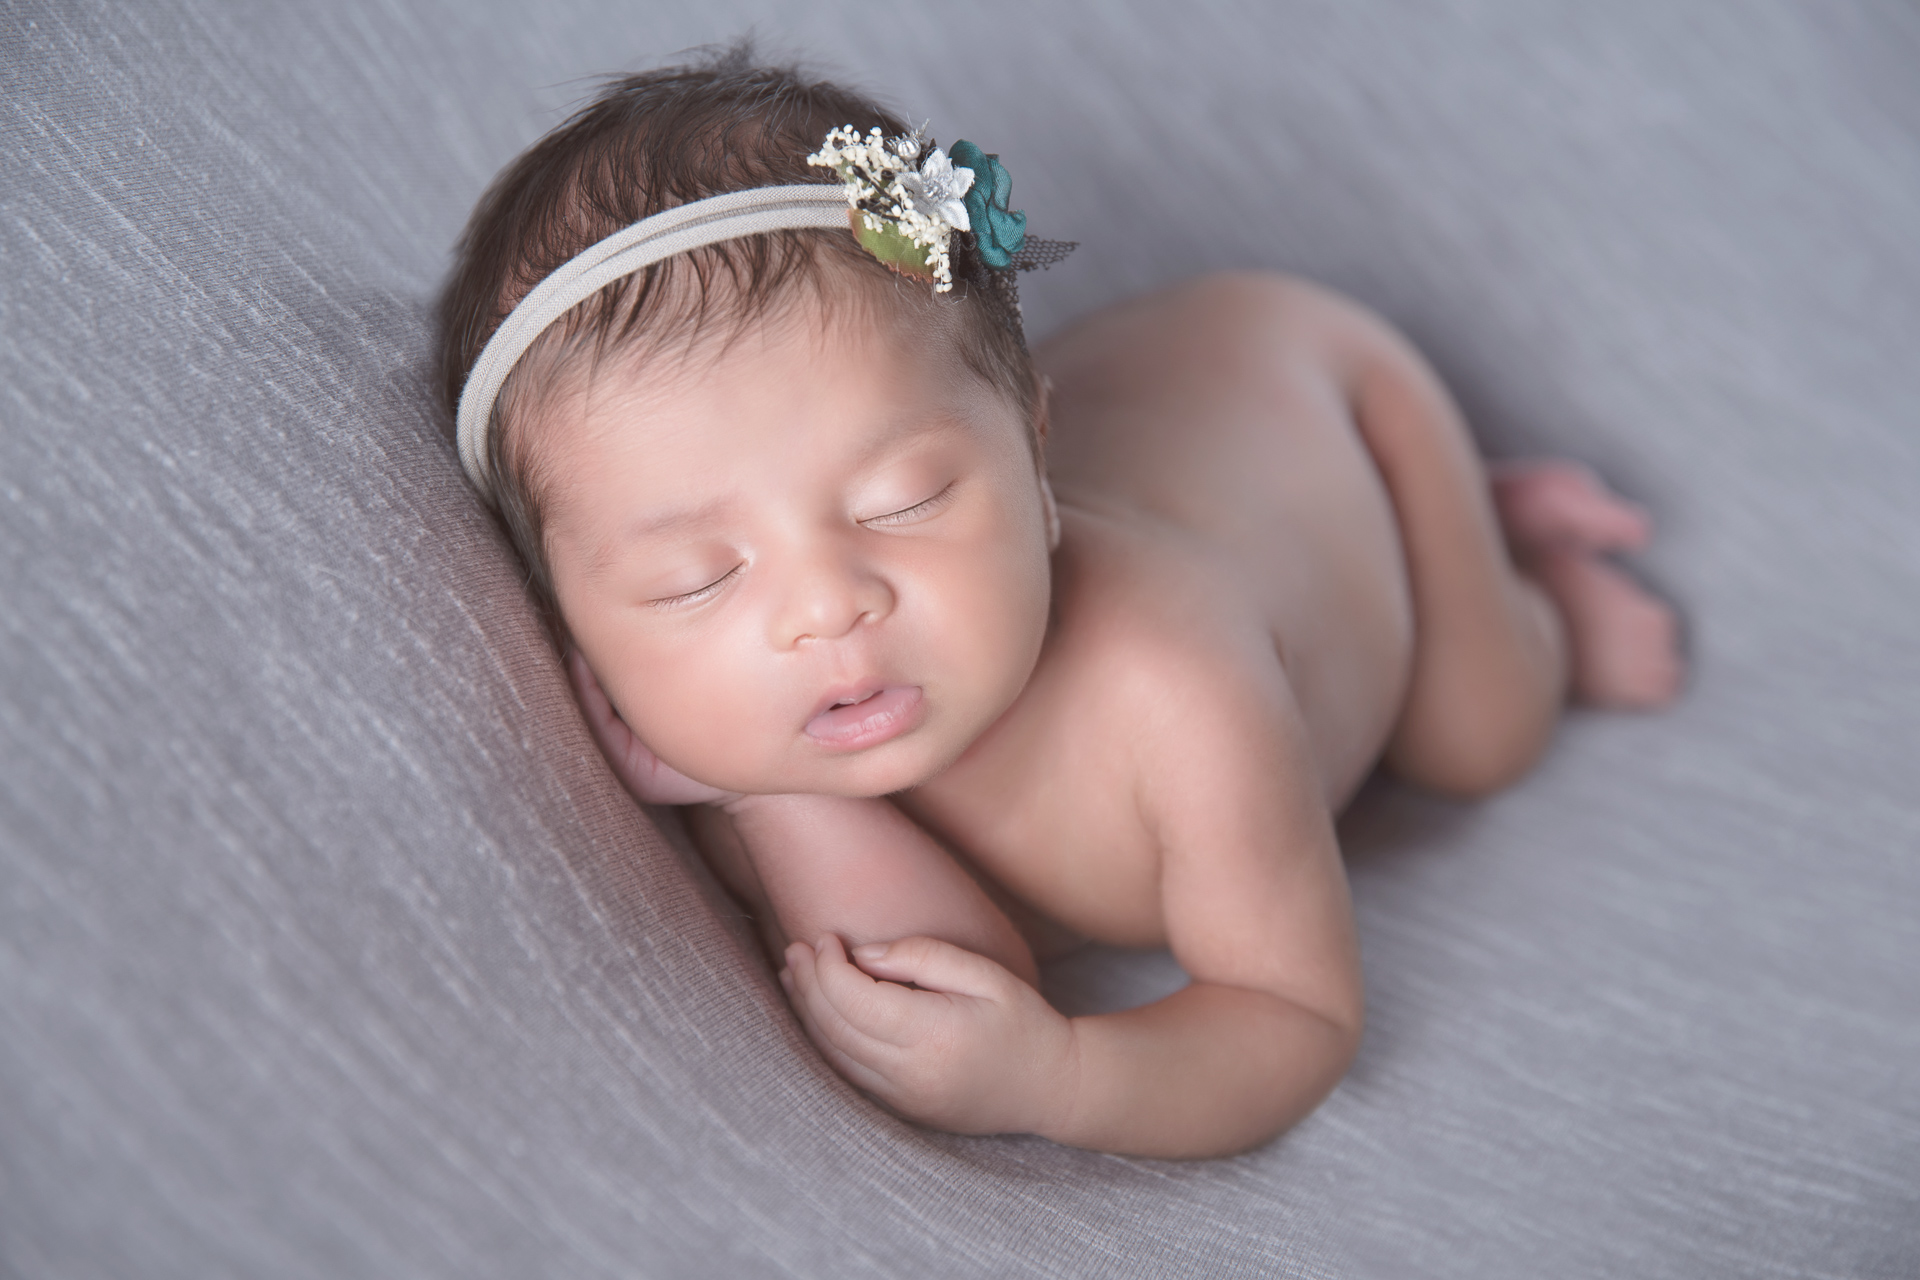 Newborn rests on gray backdrop while wearing gray headband with white and green flowers.